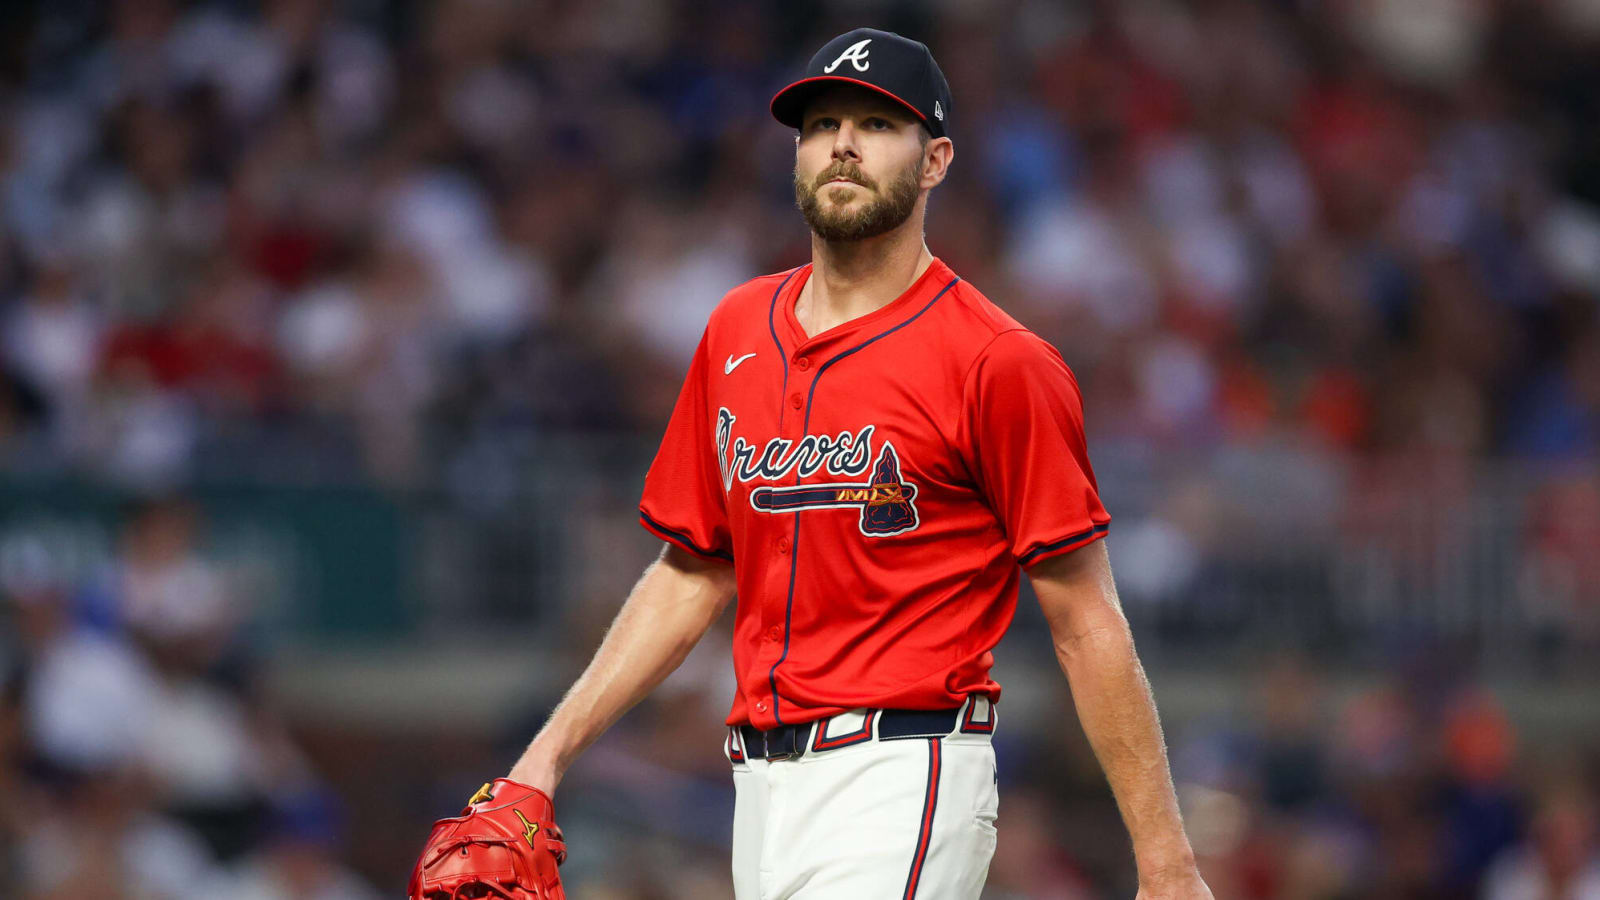 Alex Cora has fond words for Chris Sale ahead of series with Braves